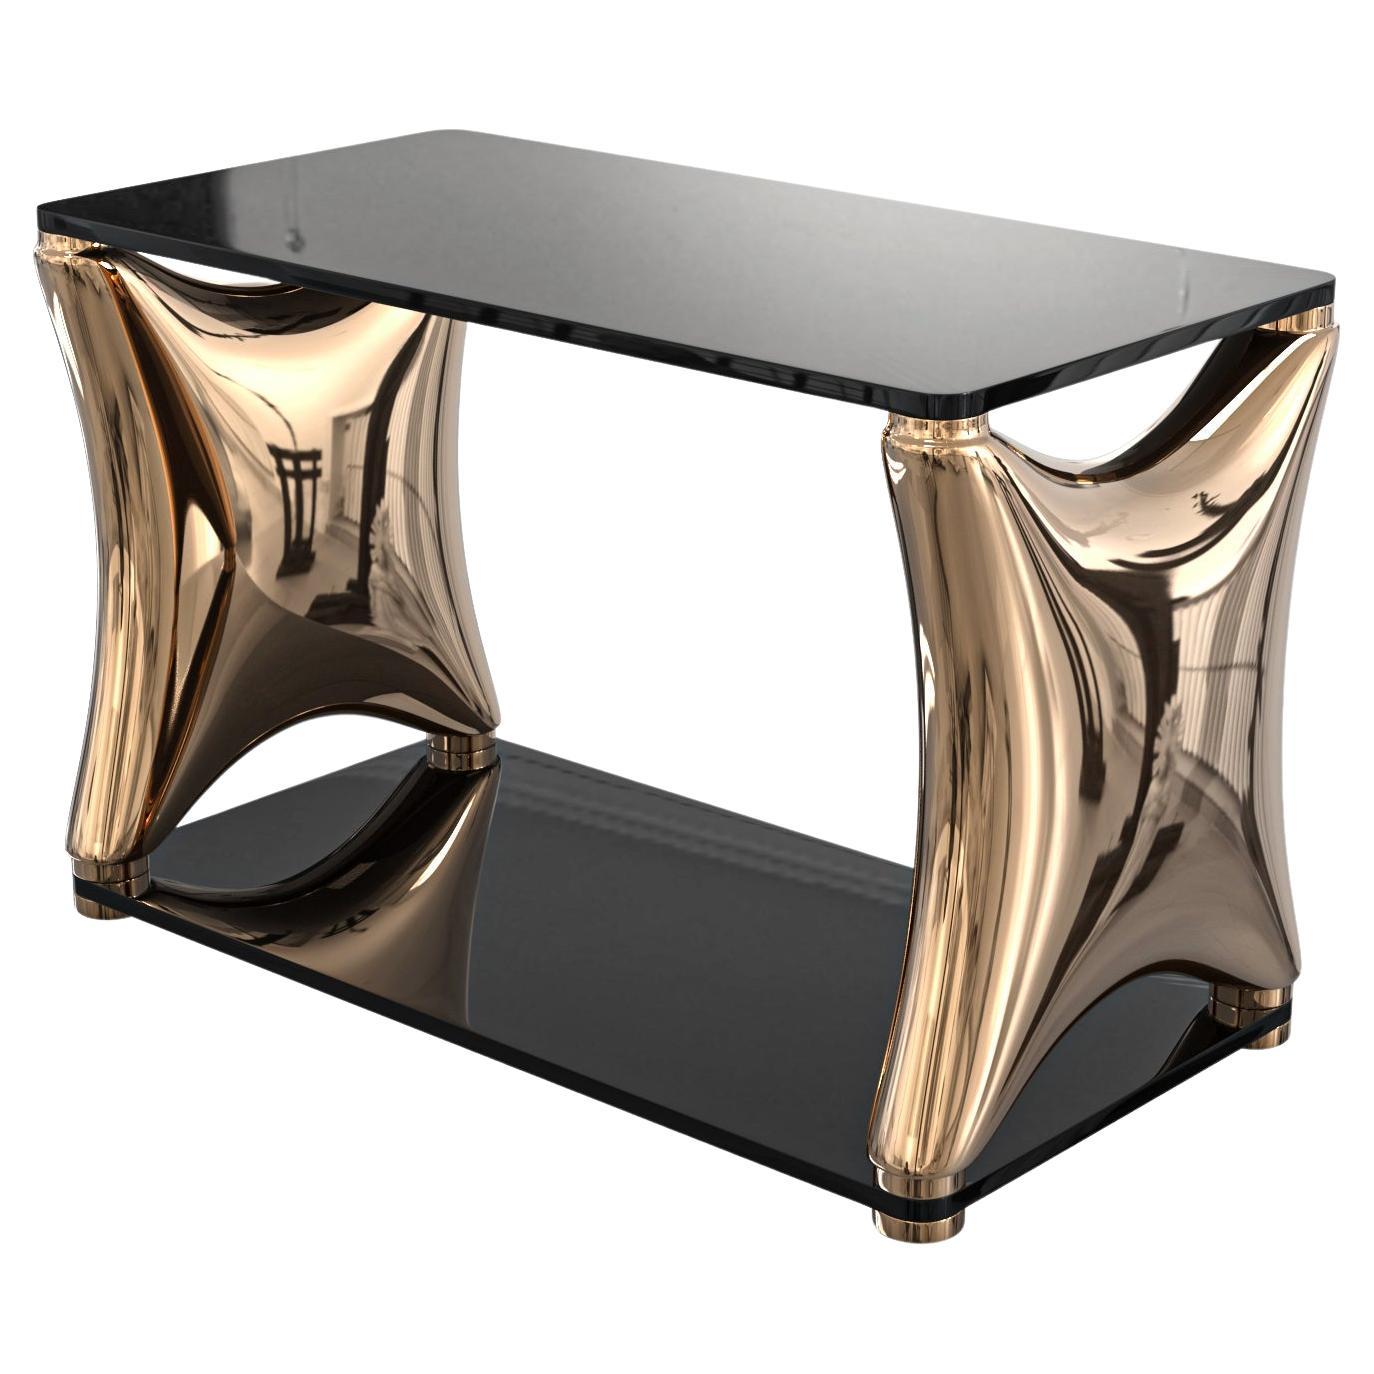 "Tirabaci" Coffee Table With Bronze, Handcrafted, Istanbul